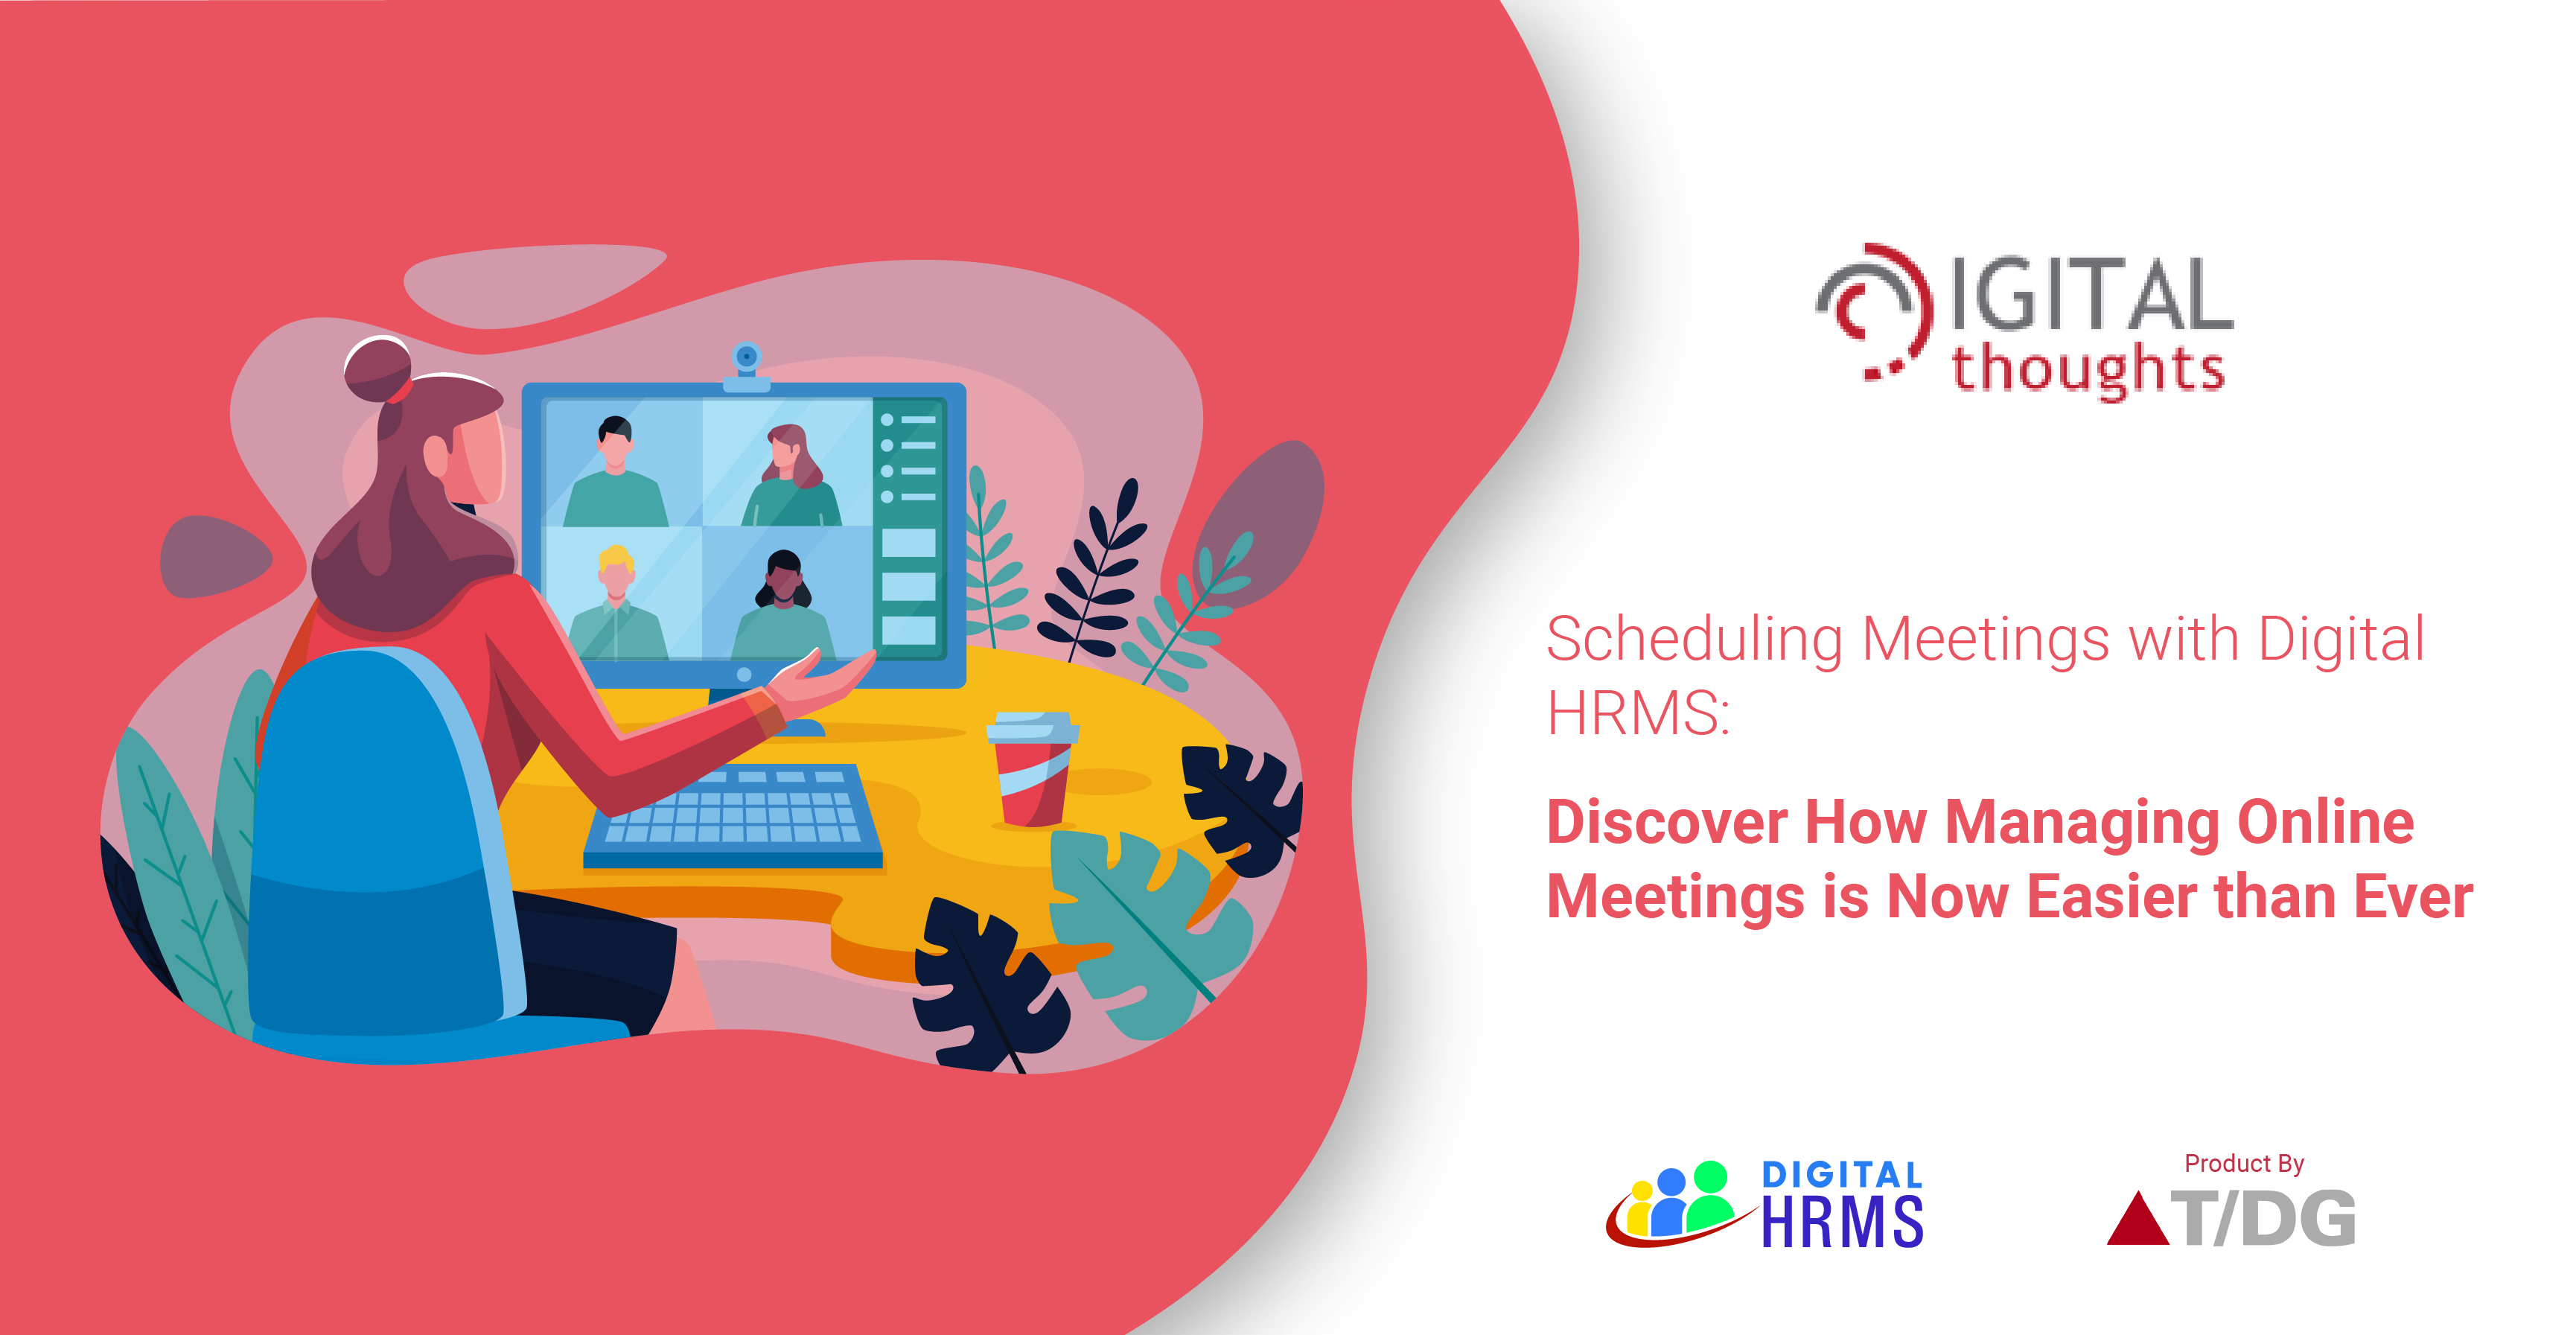 Scheduling Meetings with Digital HRMS: Discover How Managing Online Meetings is Now Easier than Ever